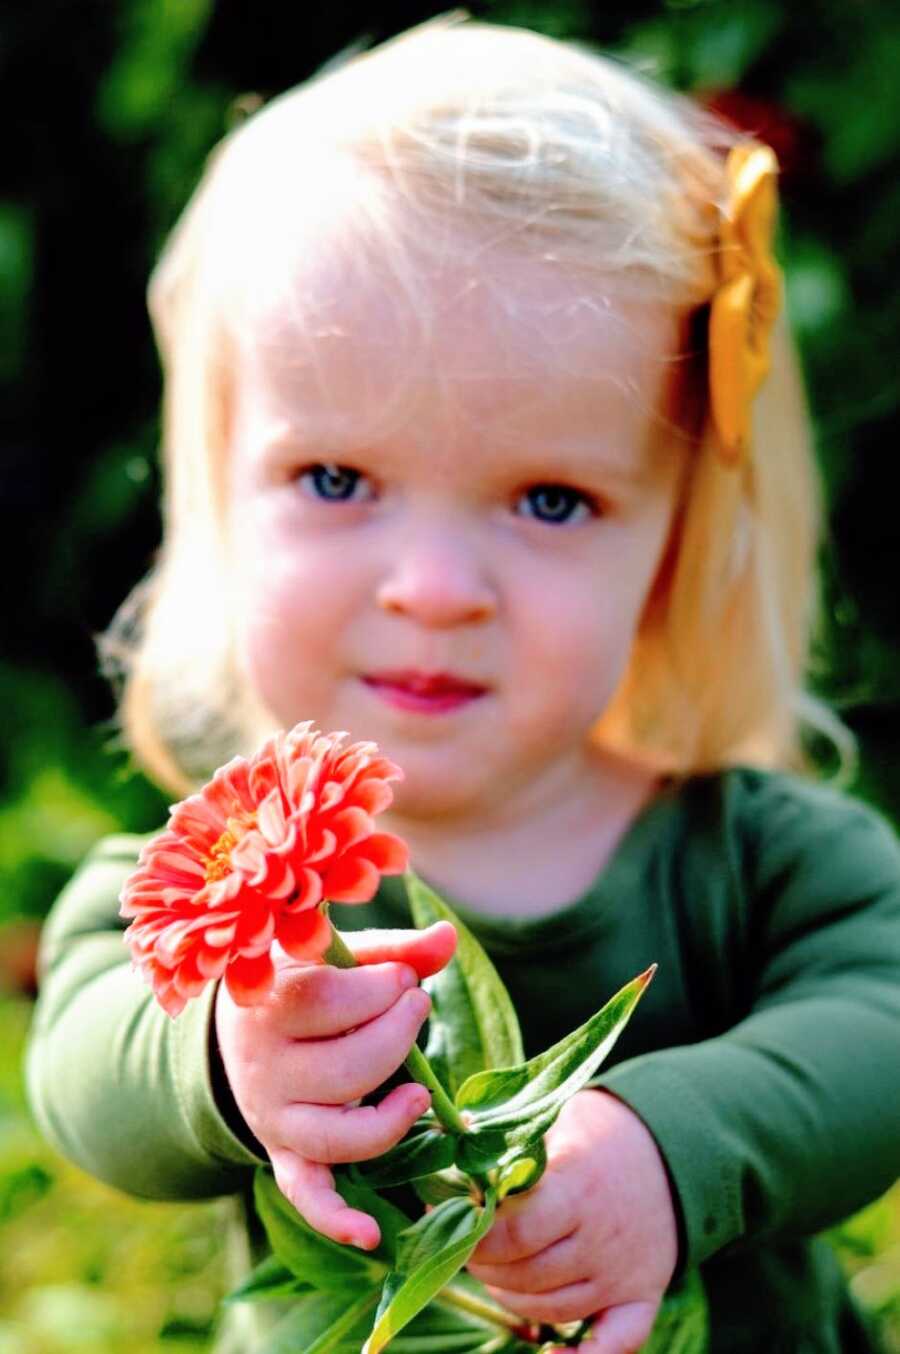 Little girl with dwarfism holds a flower during a photoshoot